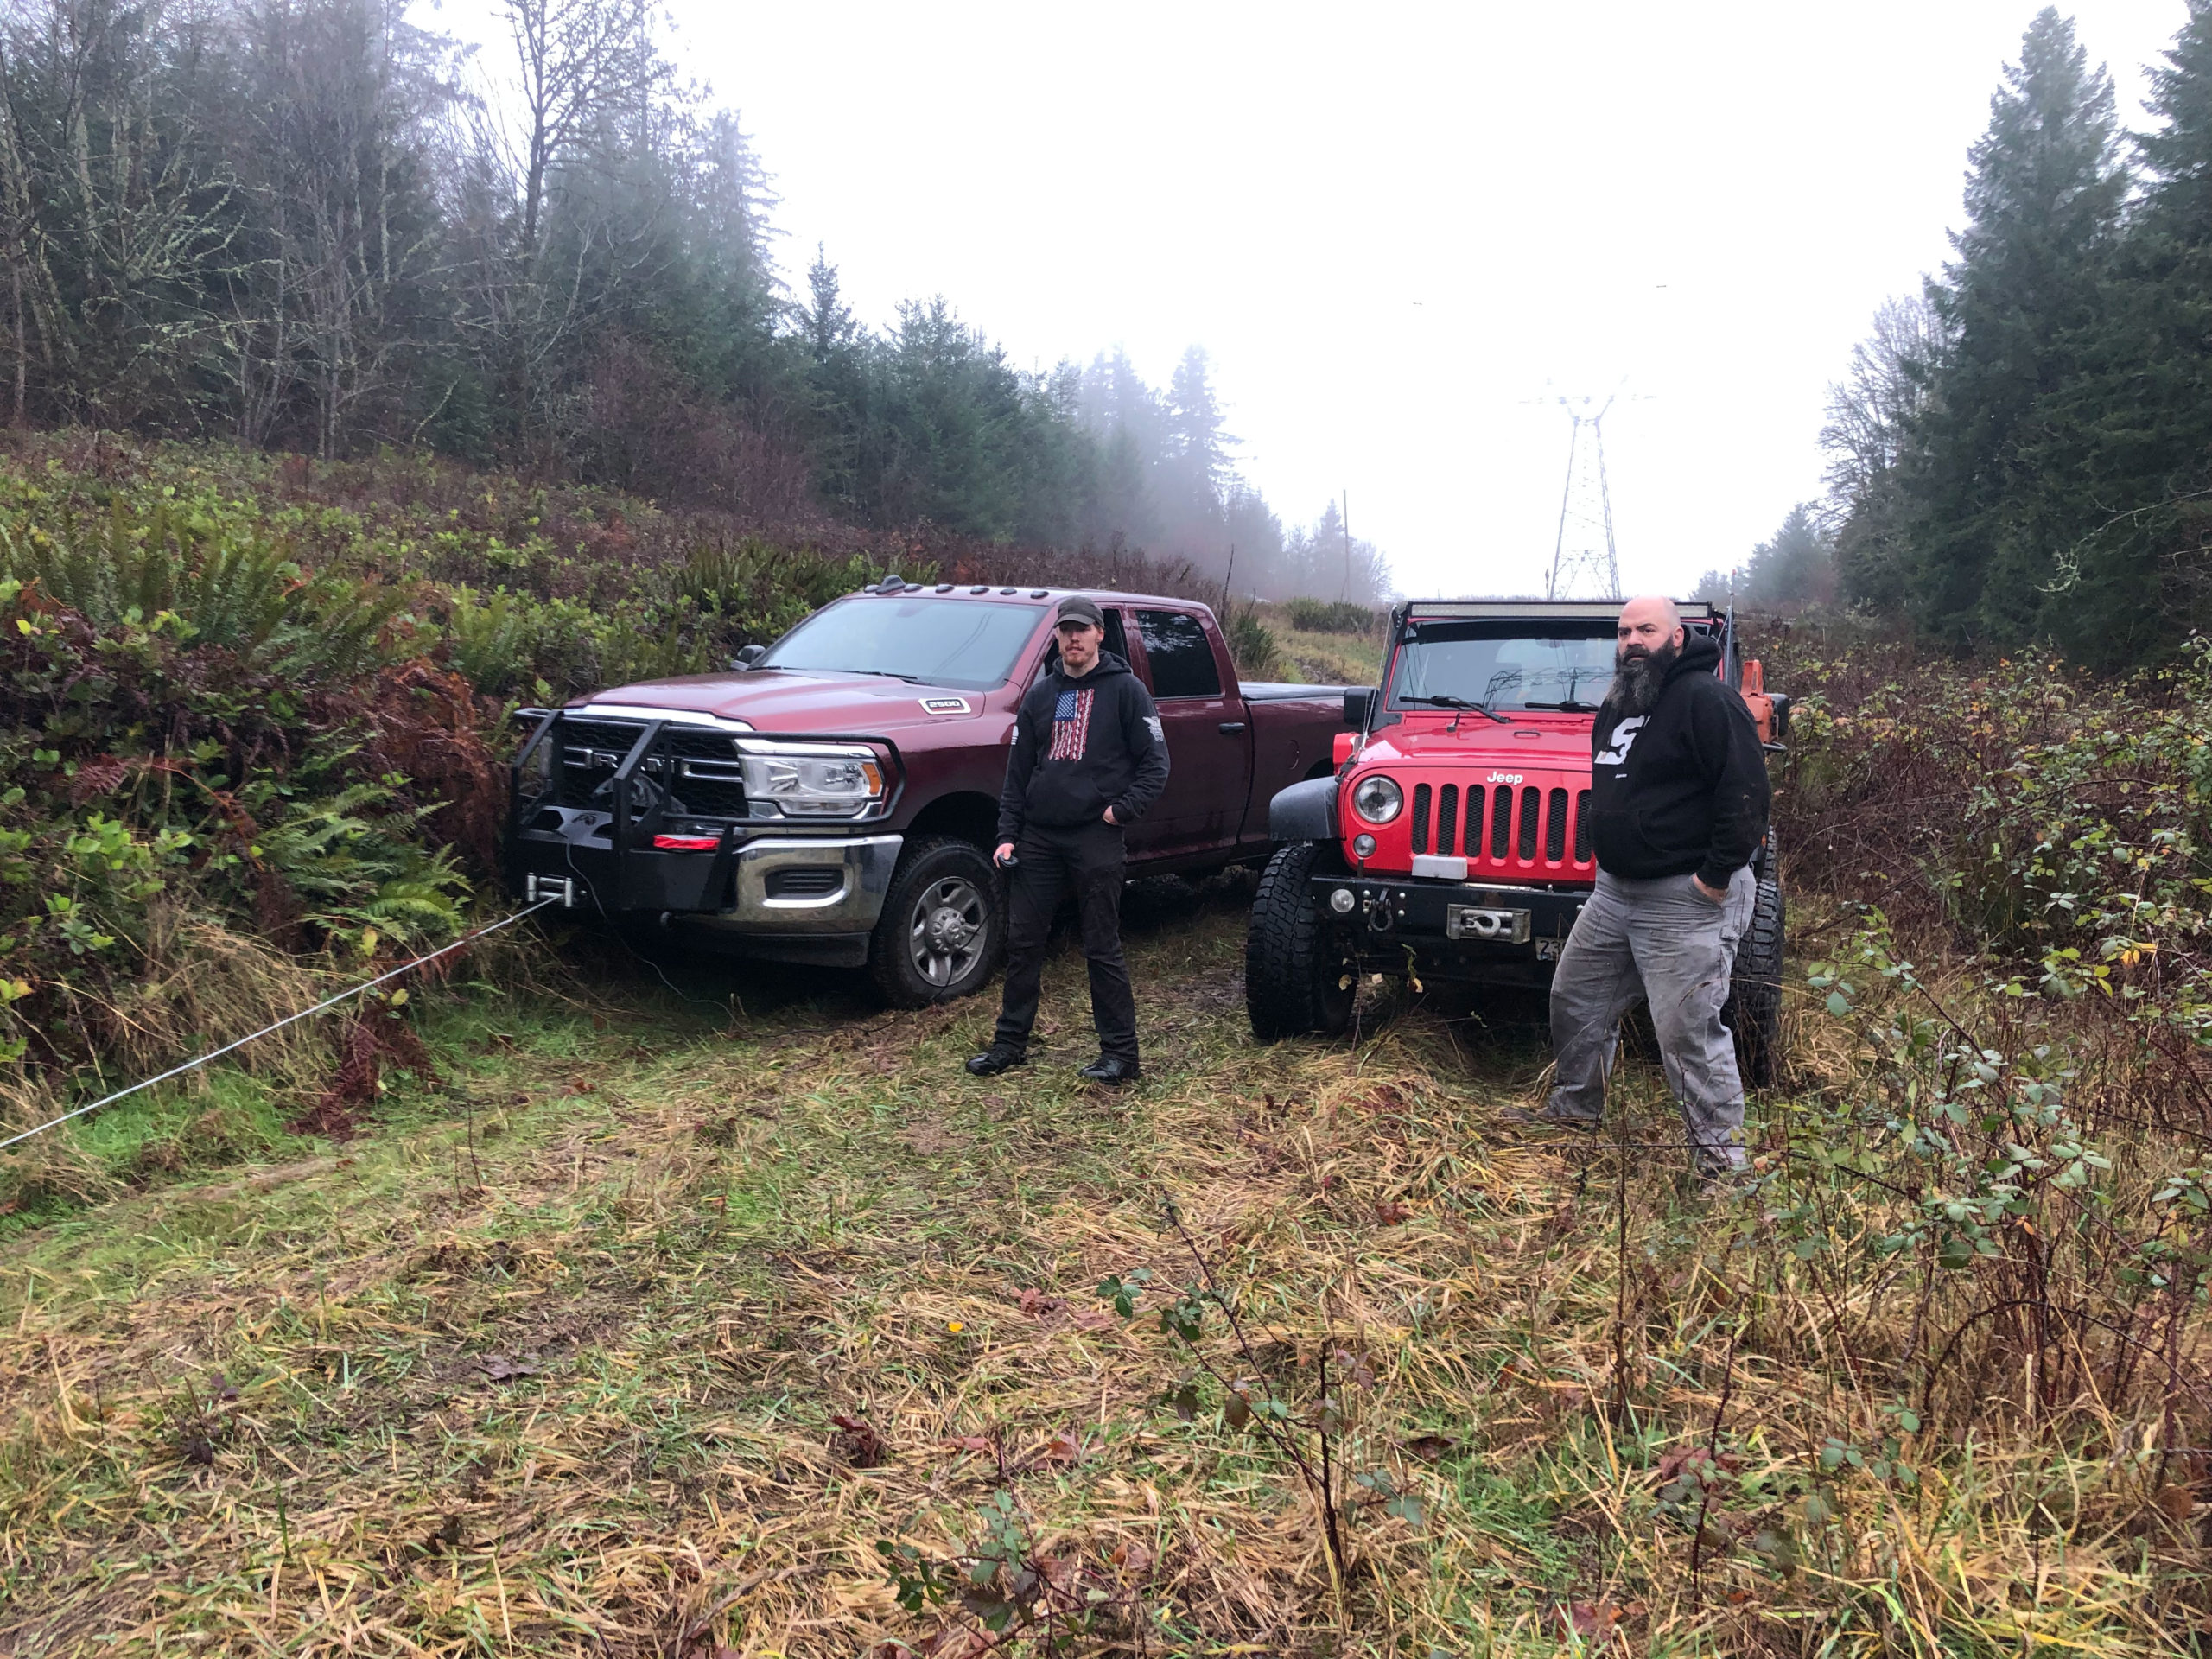 Muddy recovery near Scappoose